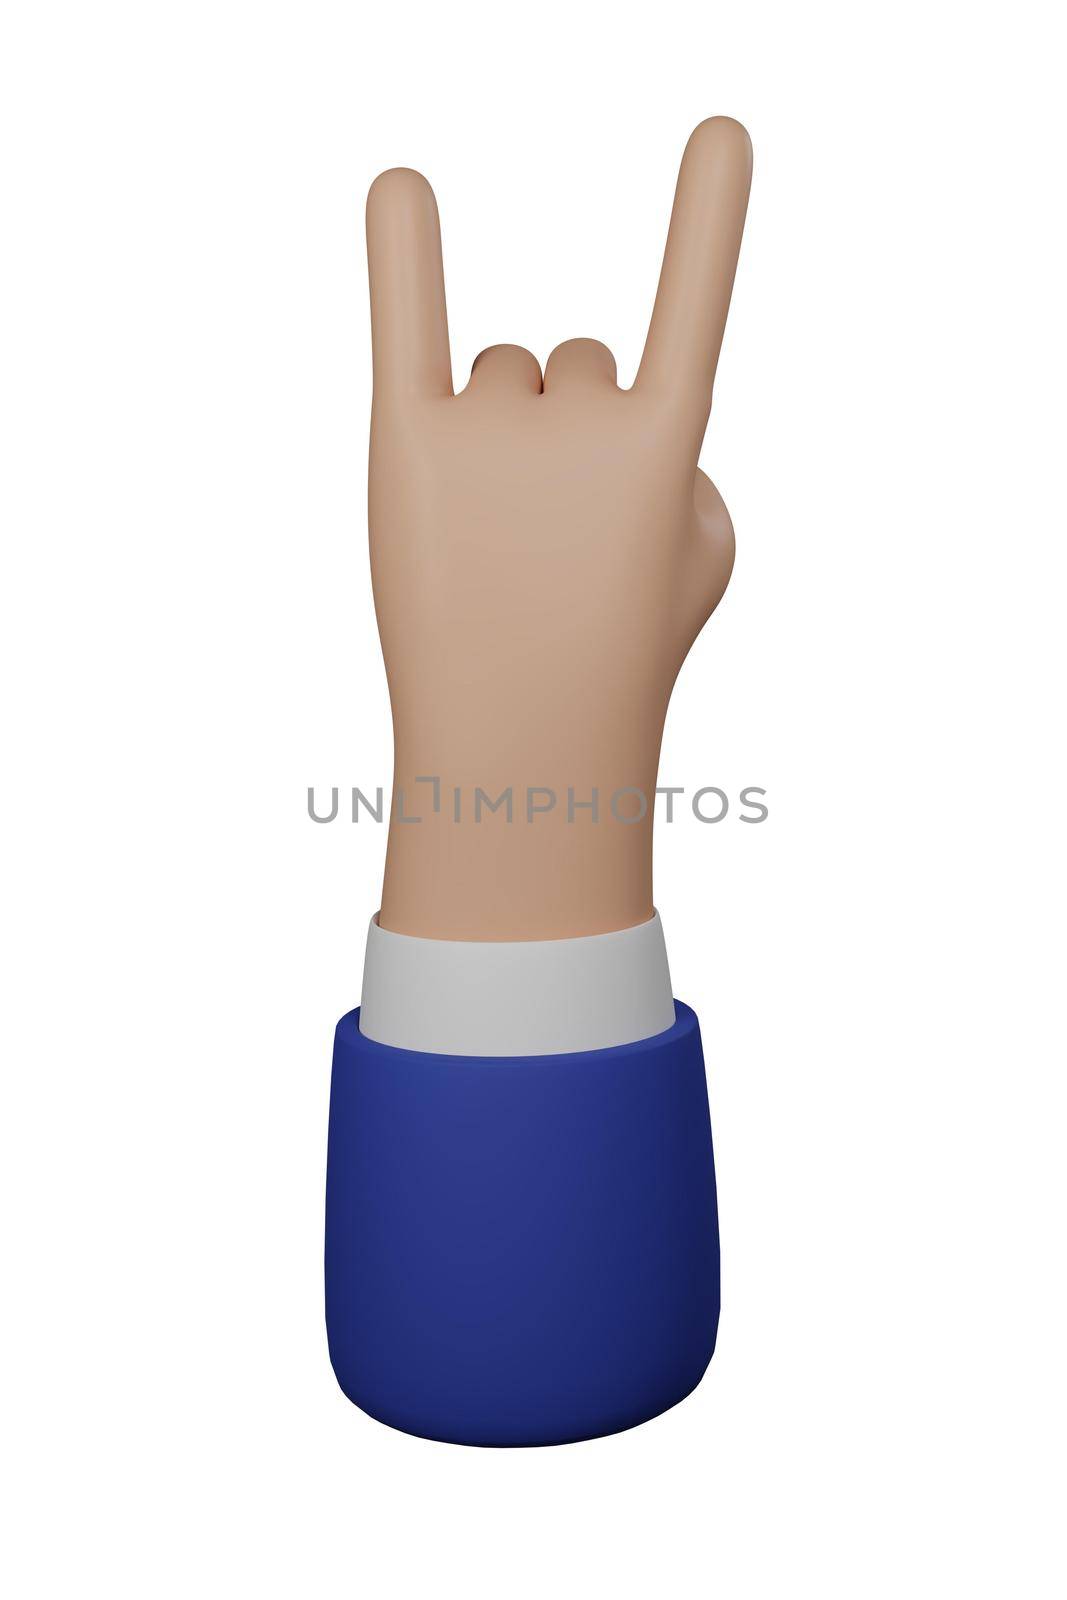 3D Cartoon businessman character hand isolated on white background. Hand gesture friendly funny style. 3d rendering by Melnyk